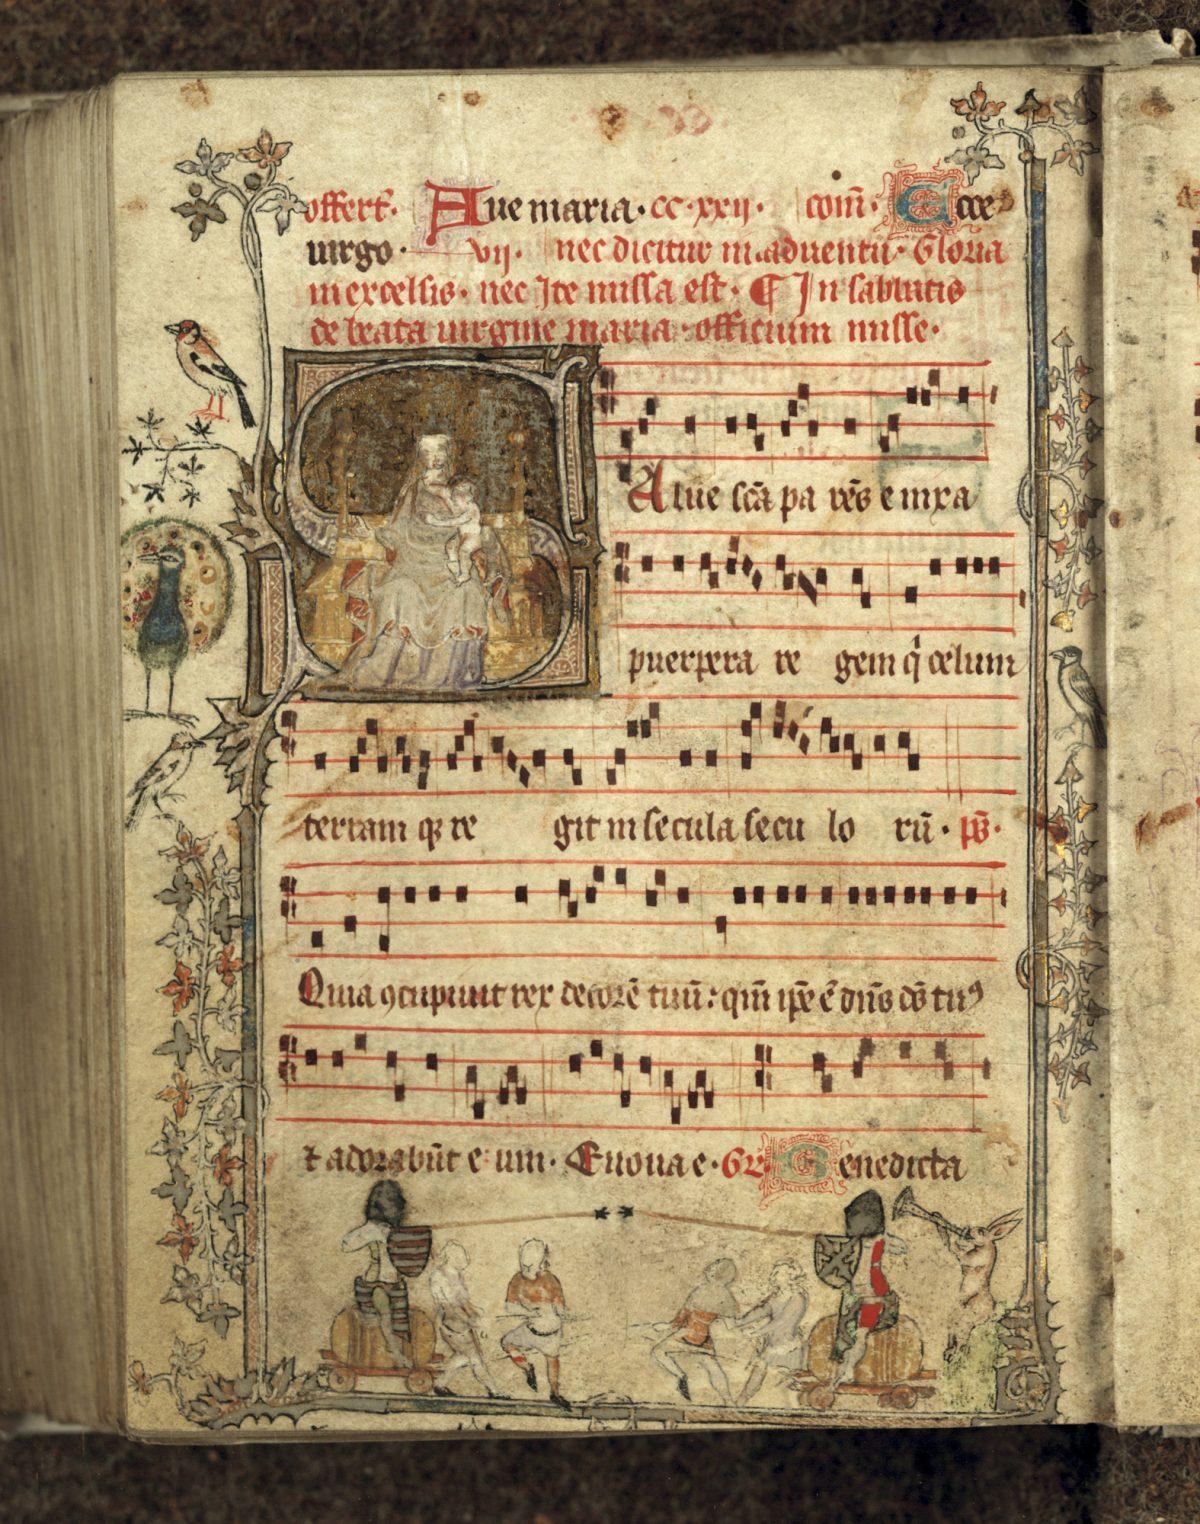 “Gradual" (songbook formerly at Genadedal), 14th century, by an unknown artist from Low Countries. Manuscript, 6 5/16 inches by 4 3/4 inches. Bibliothèque municipale, Douai. (The Frick Collection)